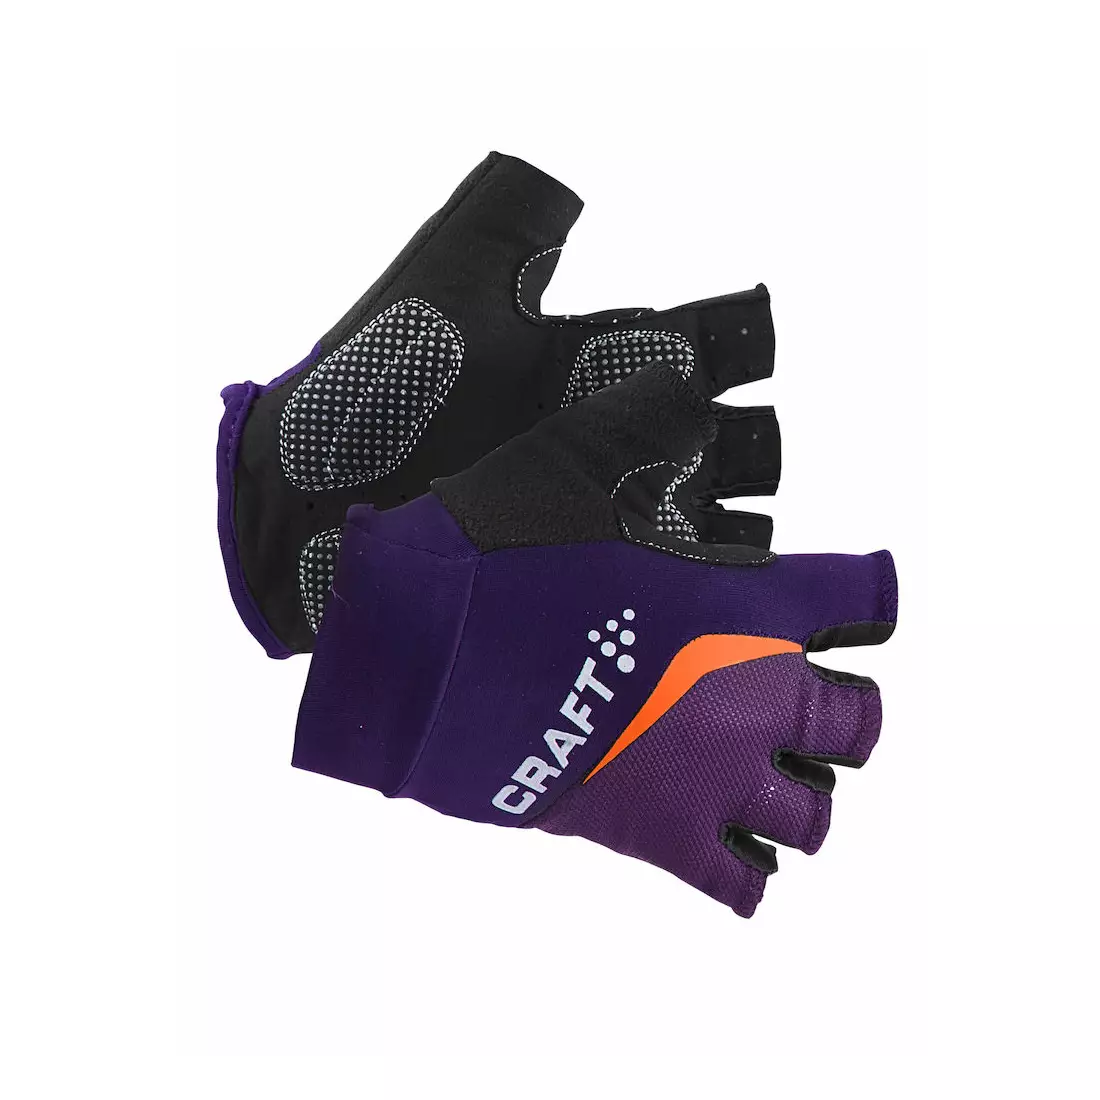 CRAFT CLASSIC GLOVE women's cycling gloves 1903305-2463